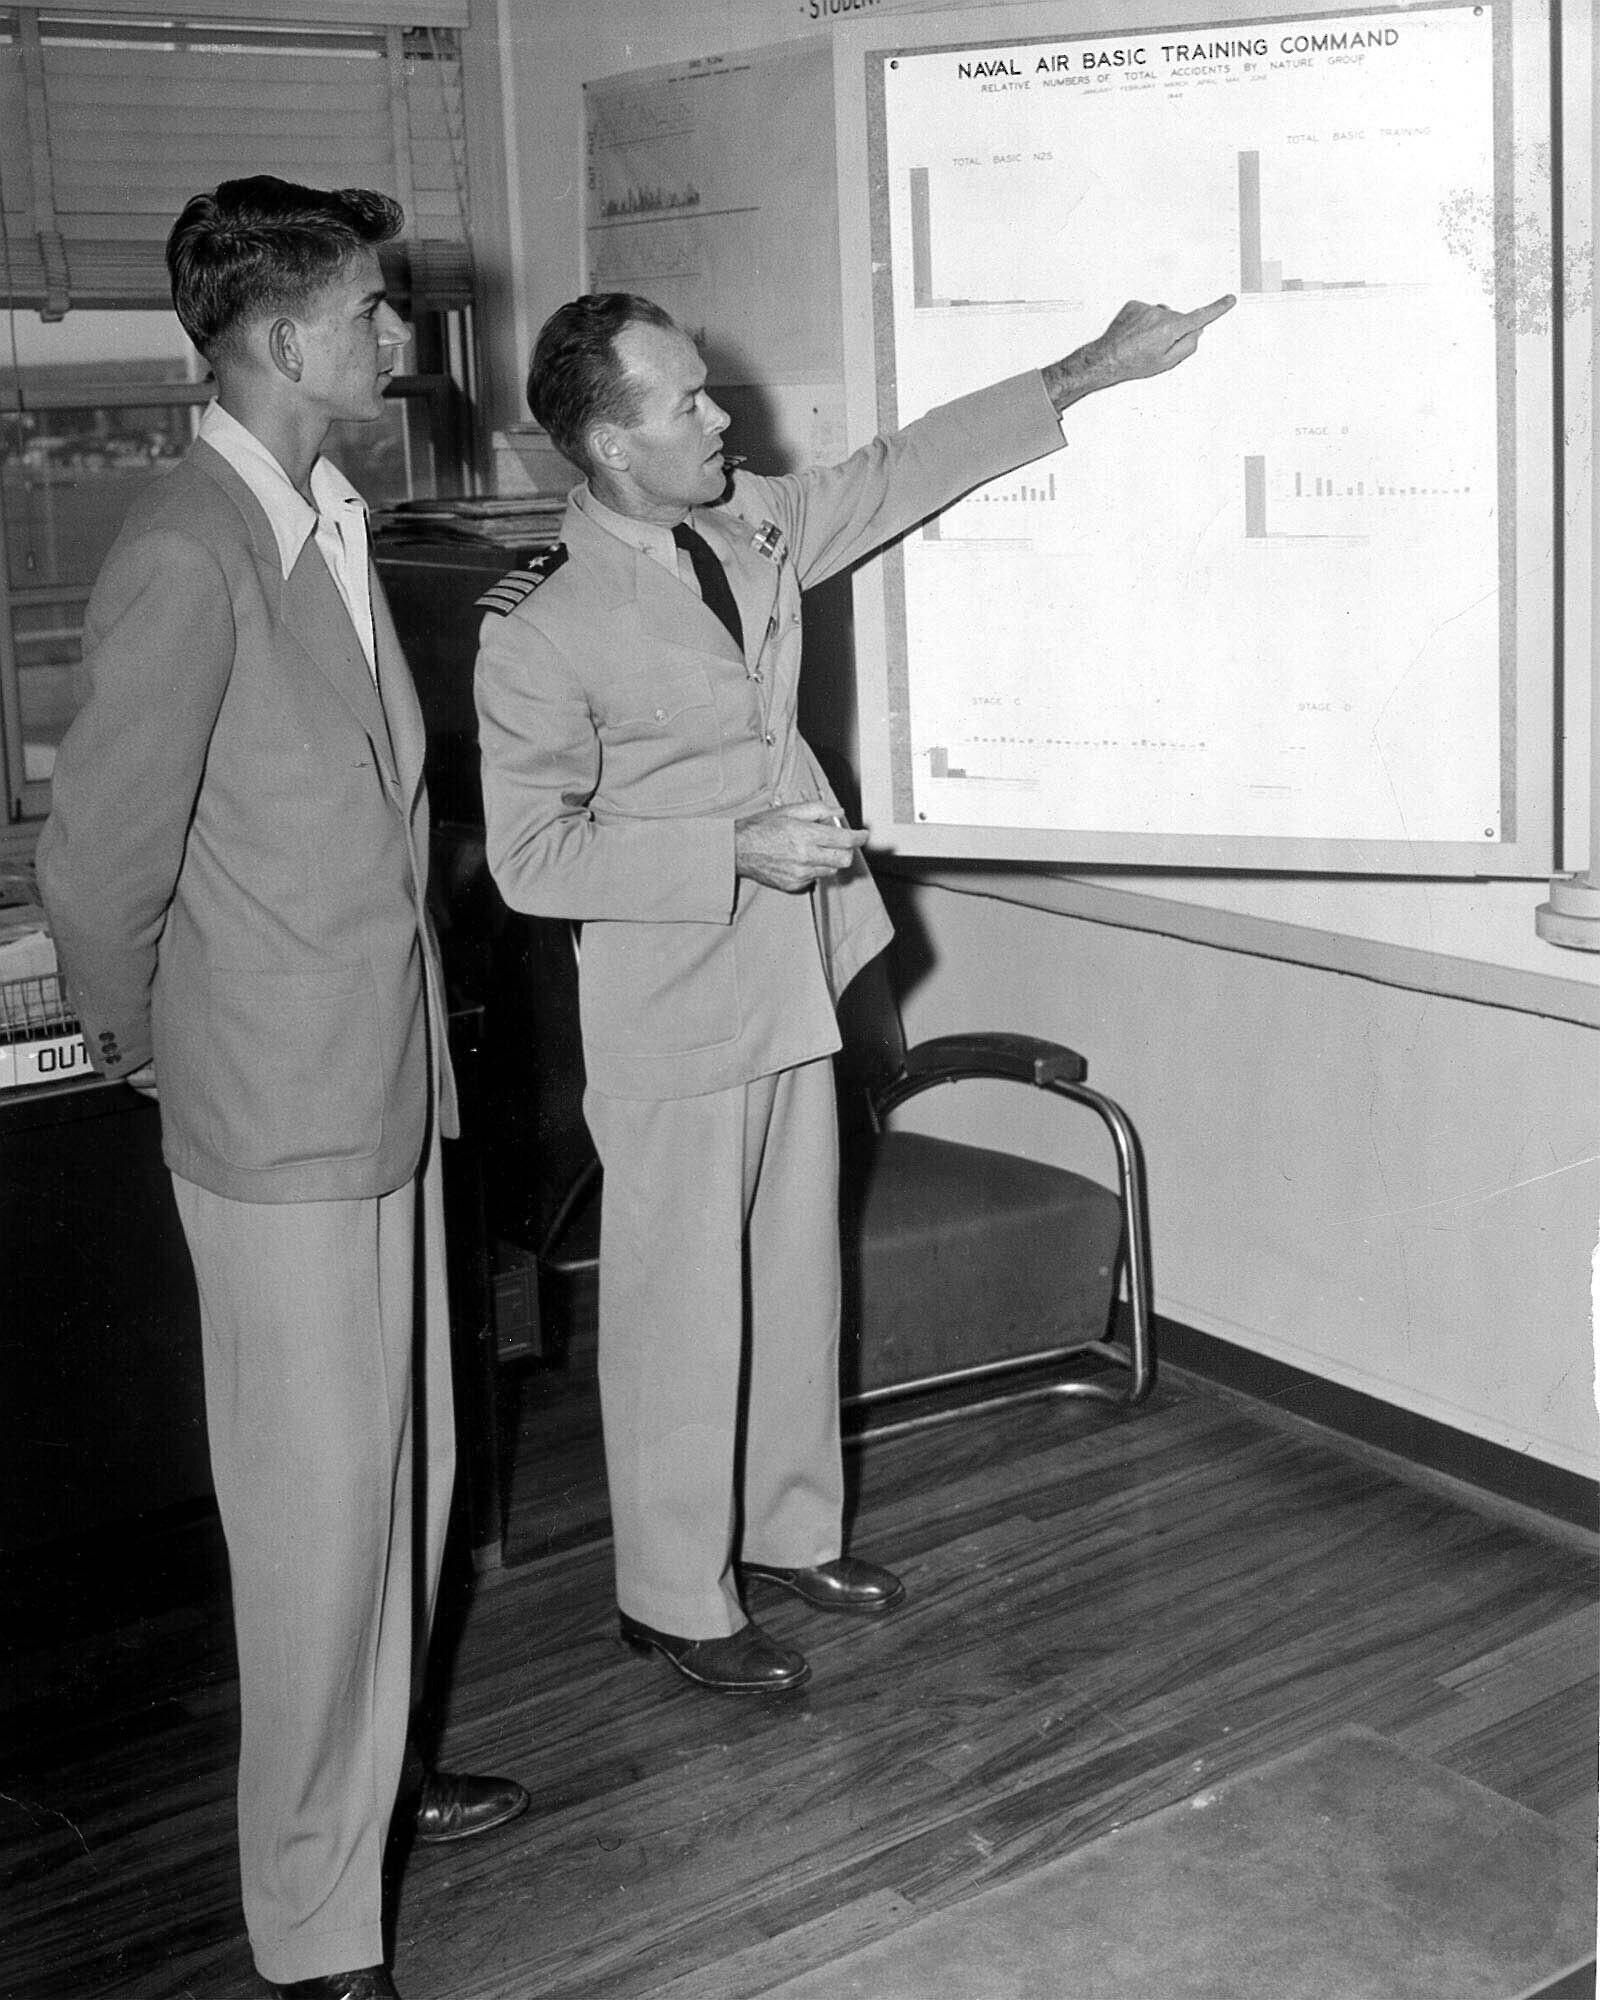 Primary Image of James H. Flatley Jr. Teaching at a Naval Air Station